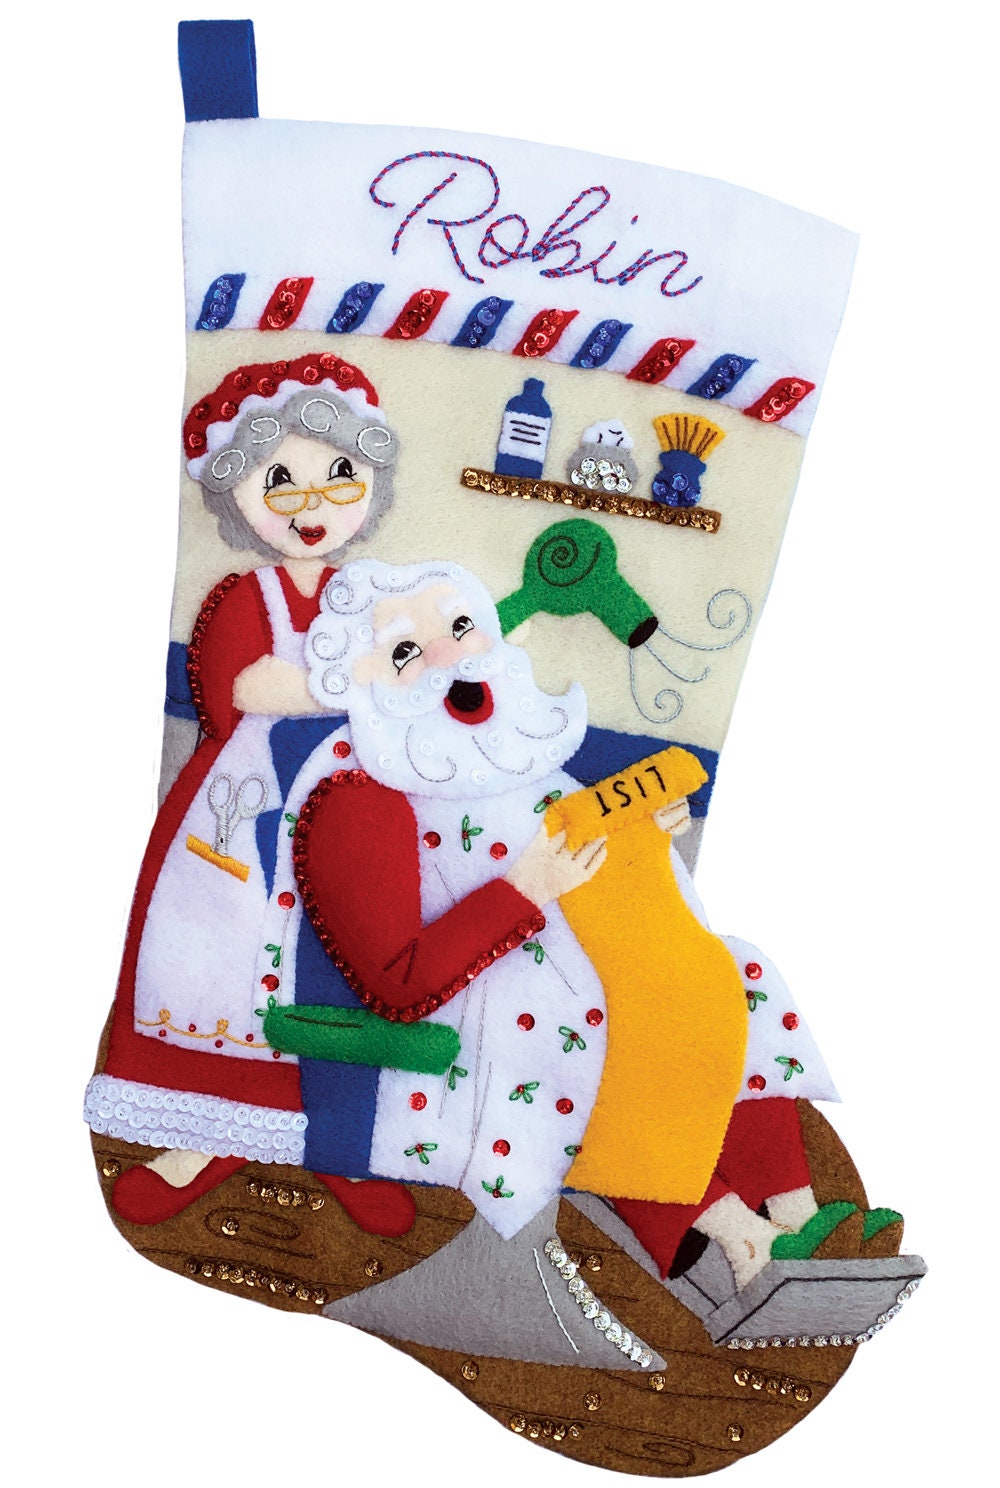 Guess Who Felt stocking kit from Bucilla available at MerryStockings